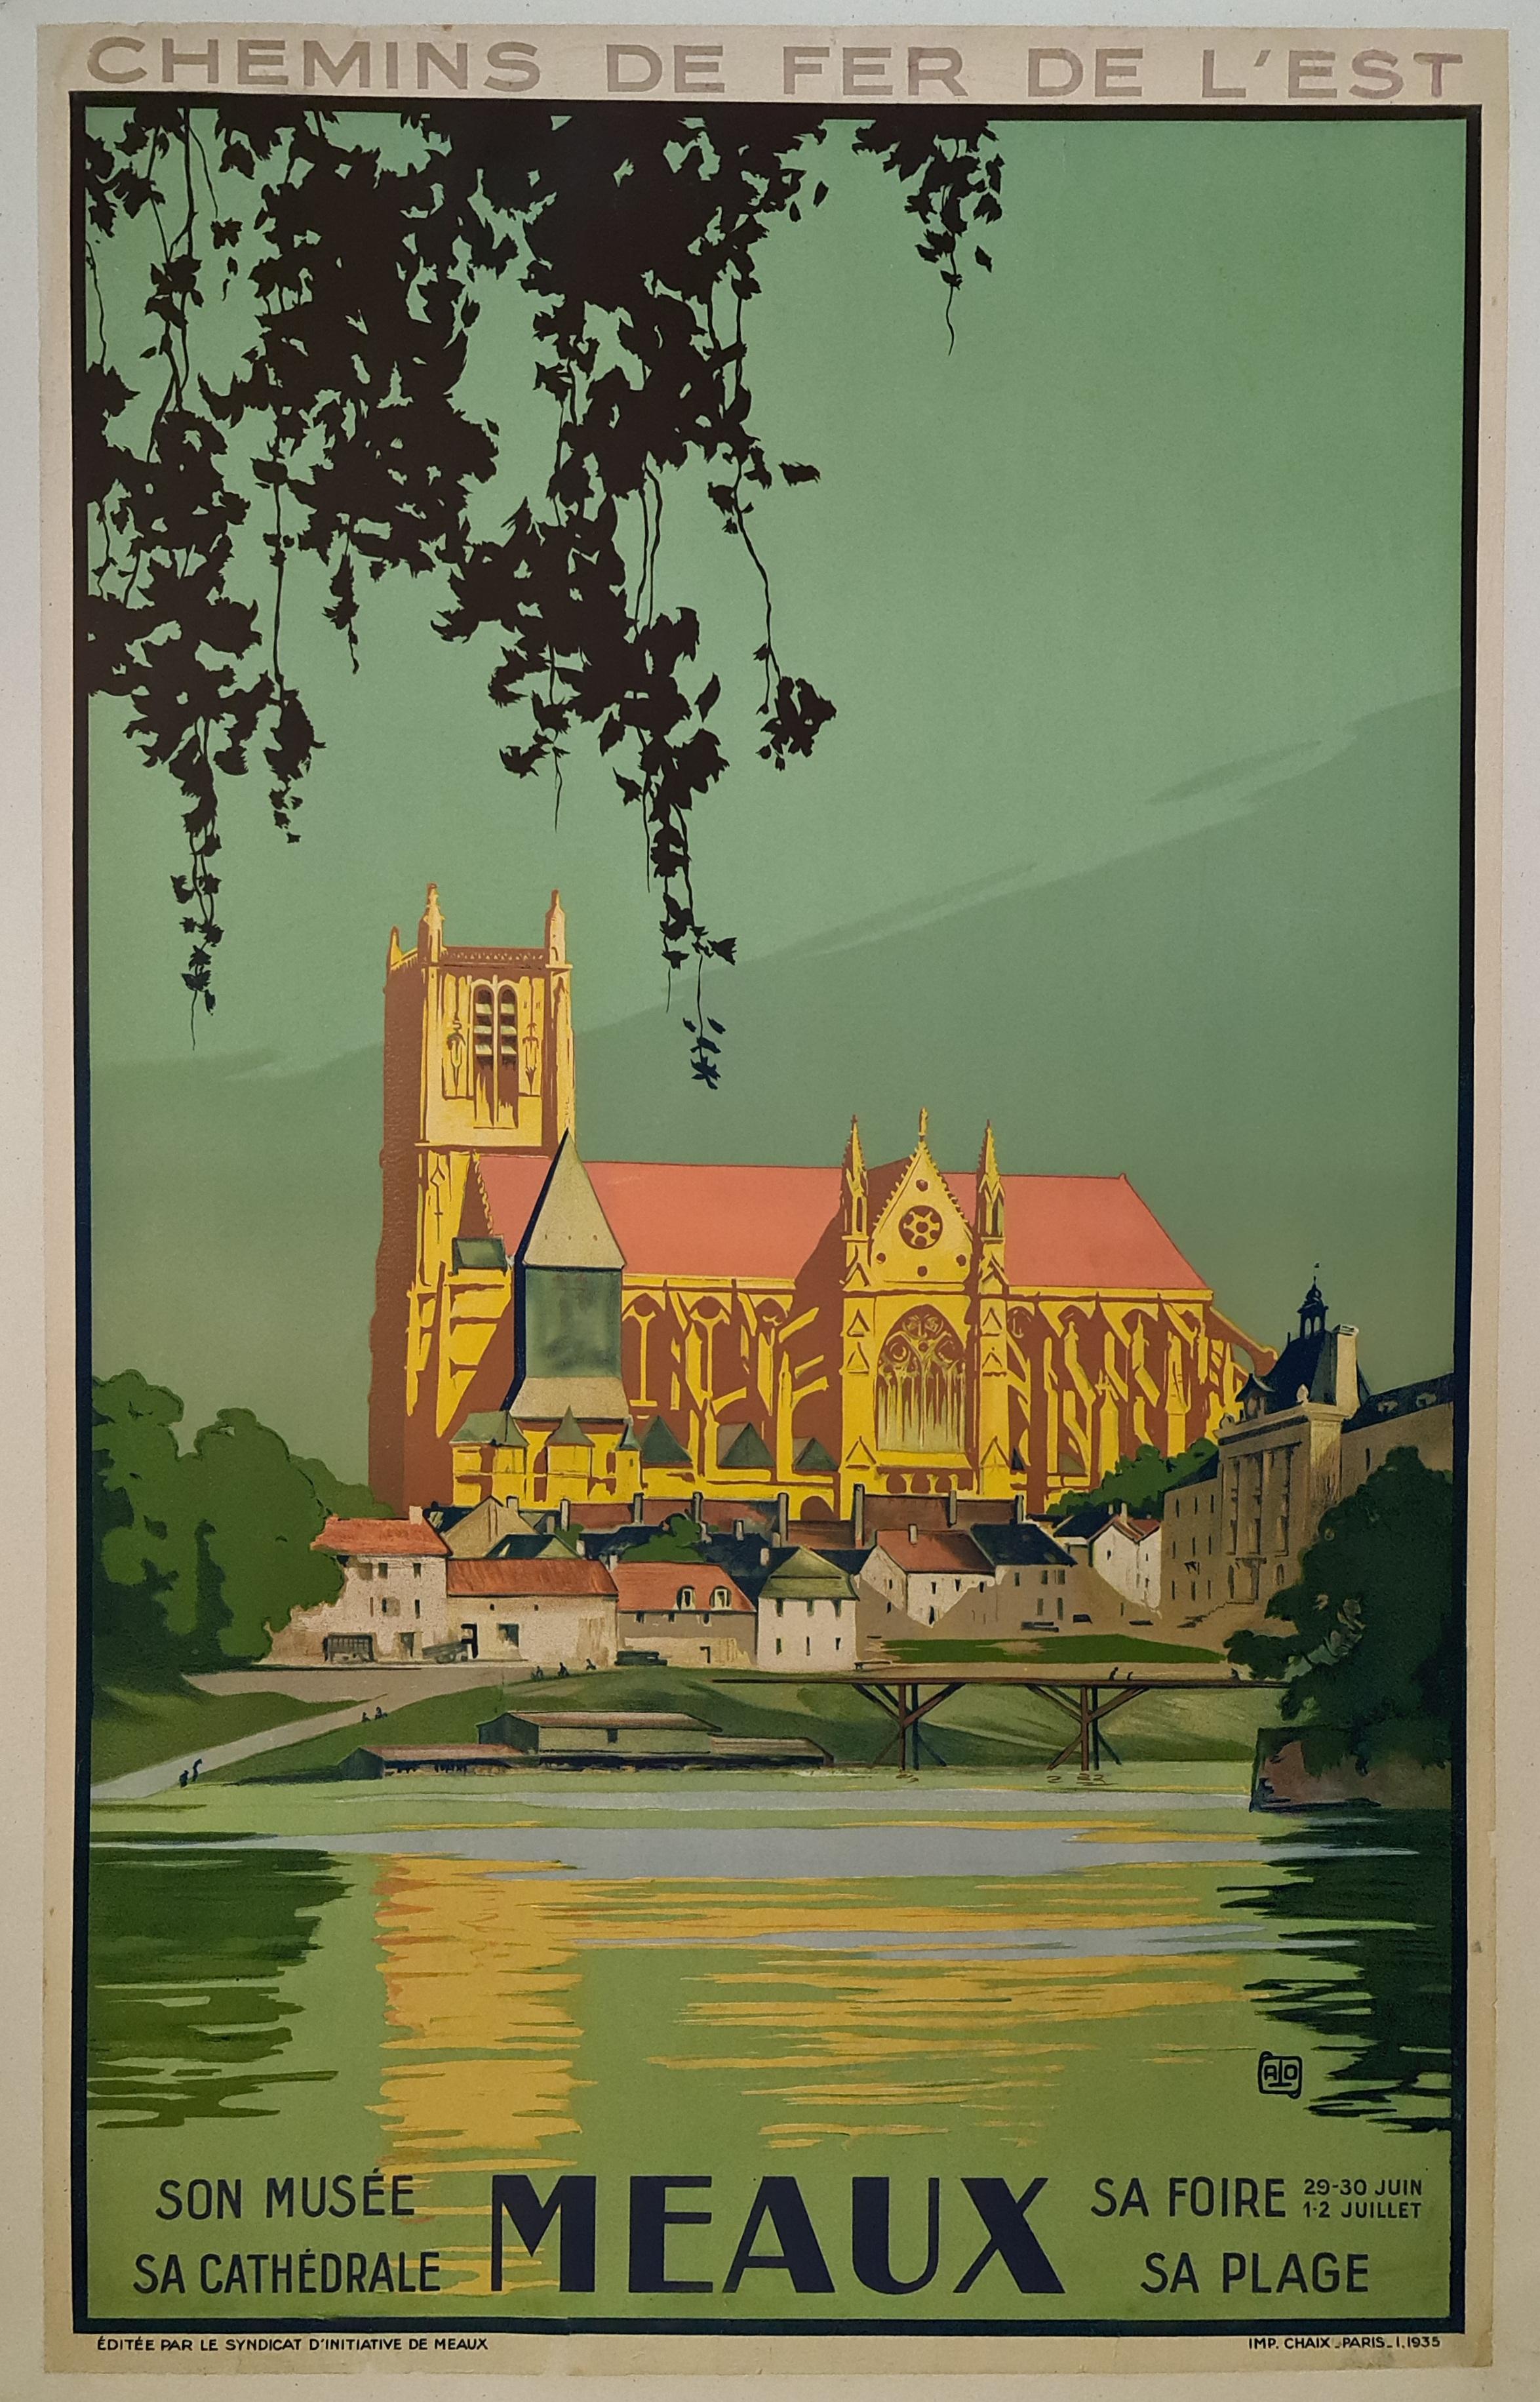 Tourist poster of Meaux for the Chemin de Fer de l'Est illustrated by Alo.
Charles-Jean Hallo ( 1882 - 1969 ), known as ALO is a French painter, draftsman, illustrator, engraver and photographer.

Railway - Tourism - Seine et Marne

Eastern